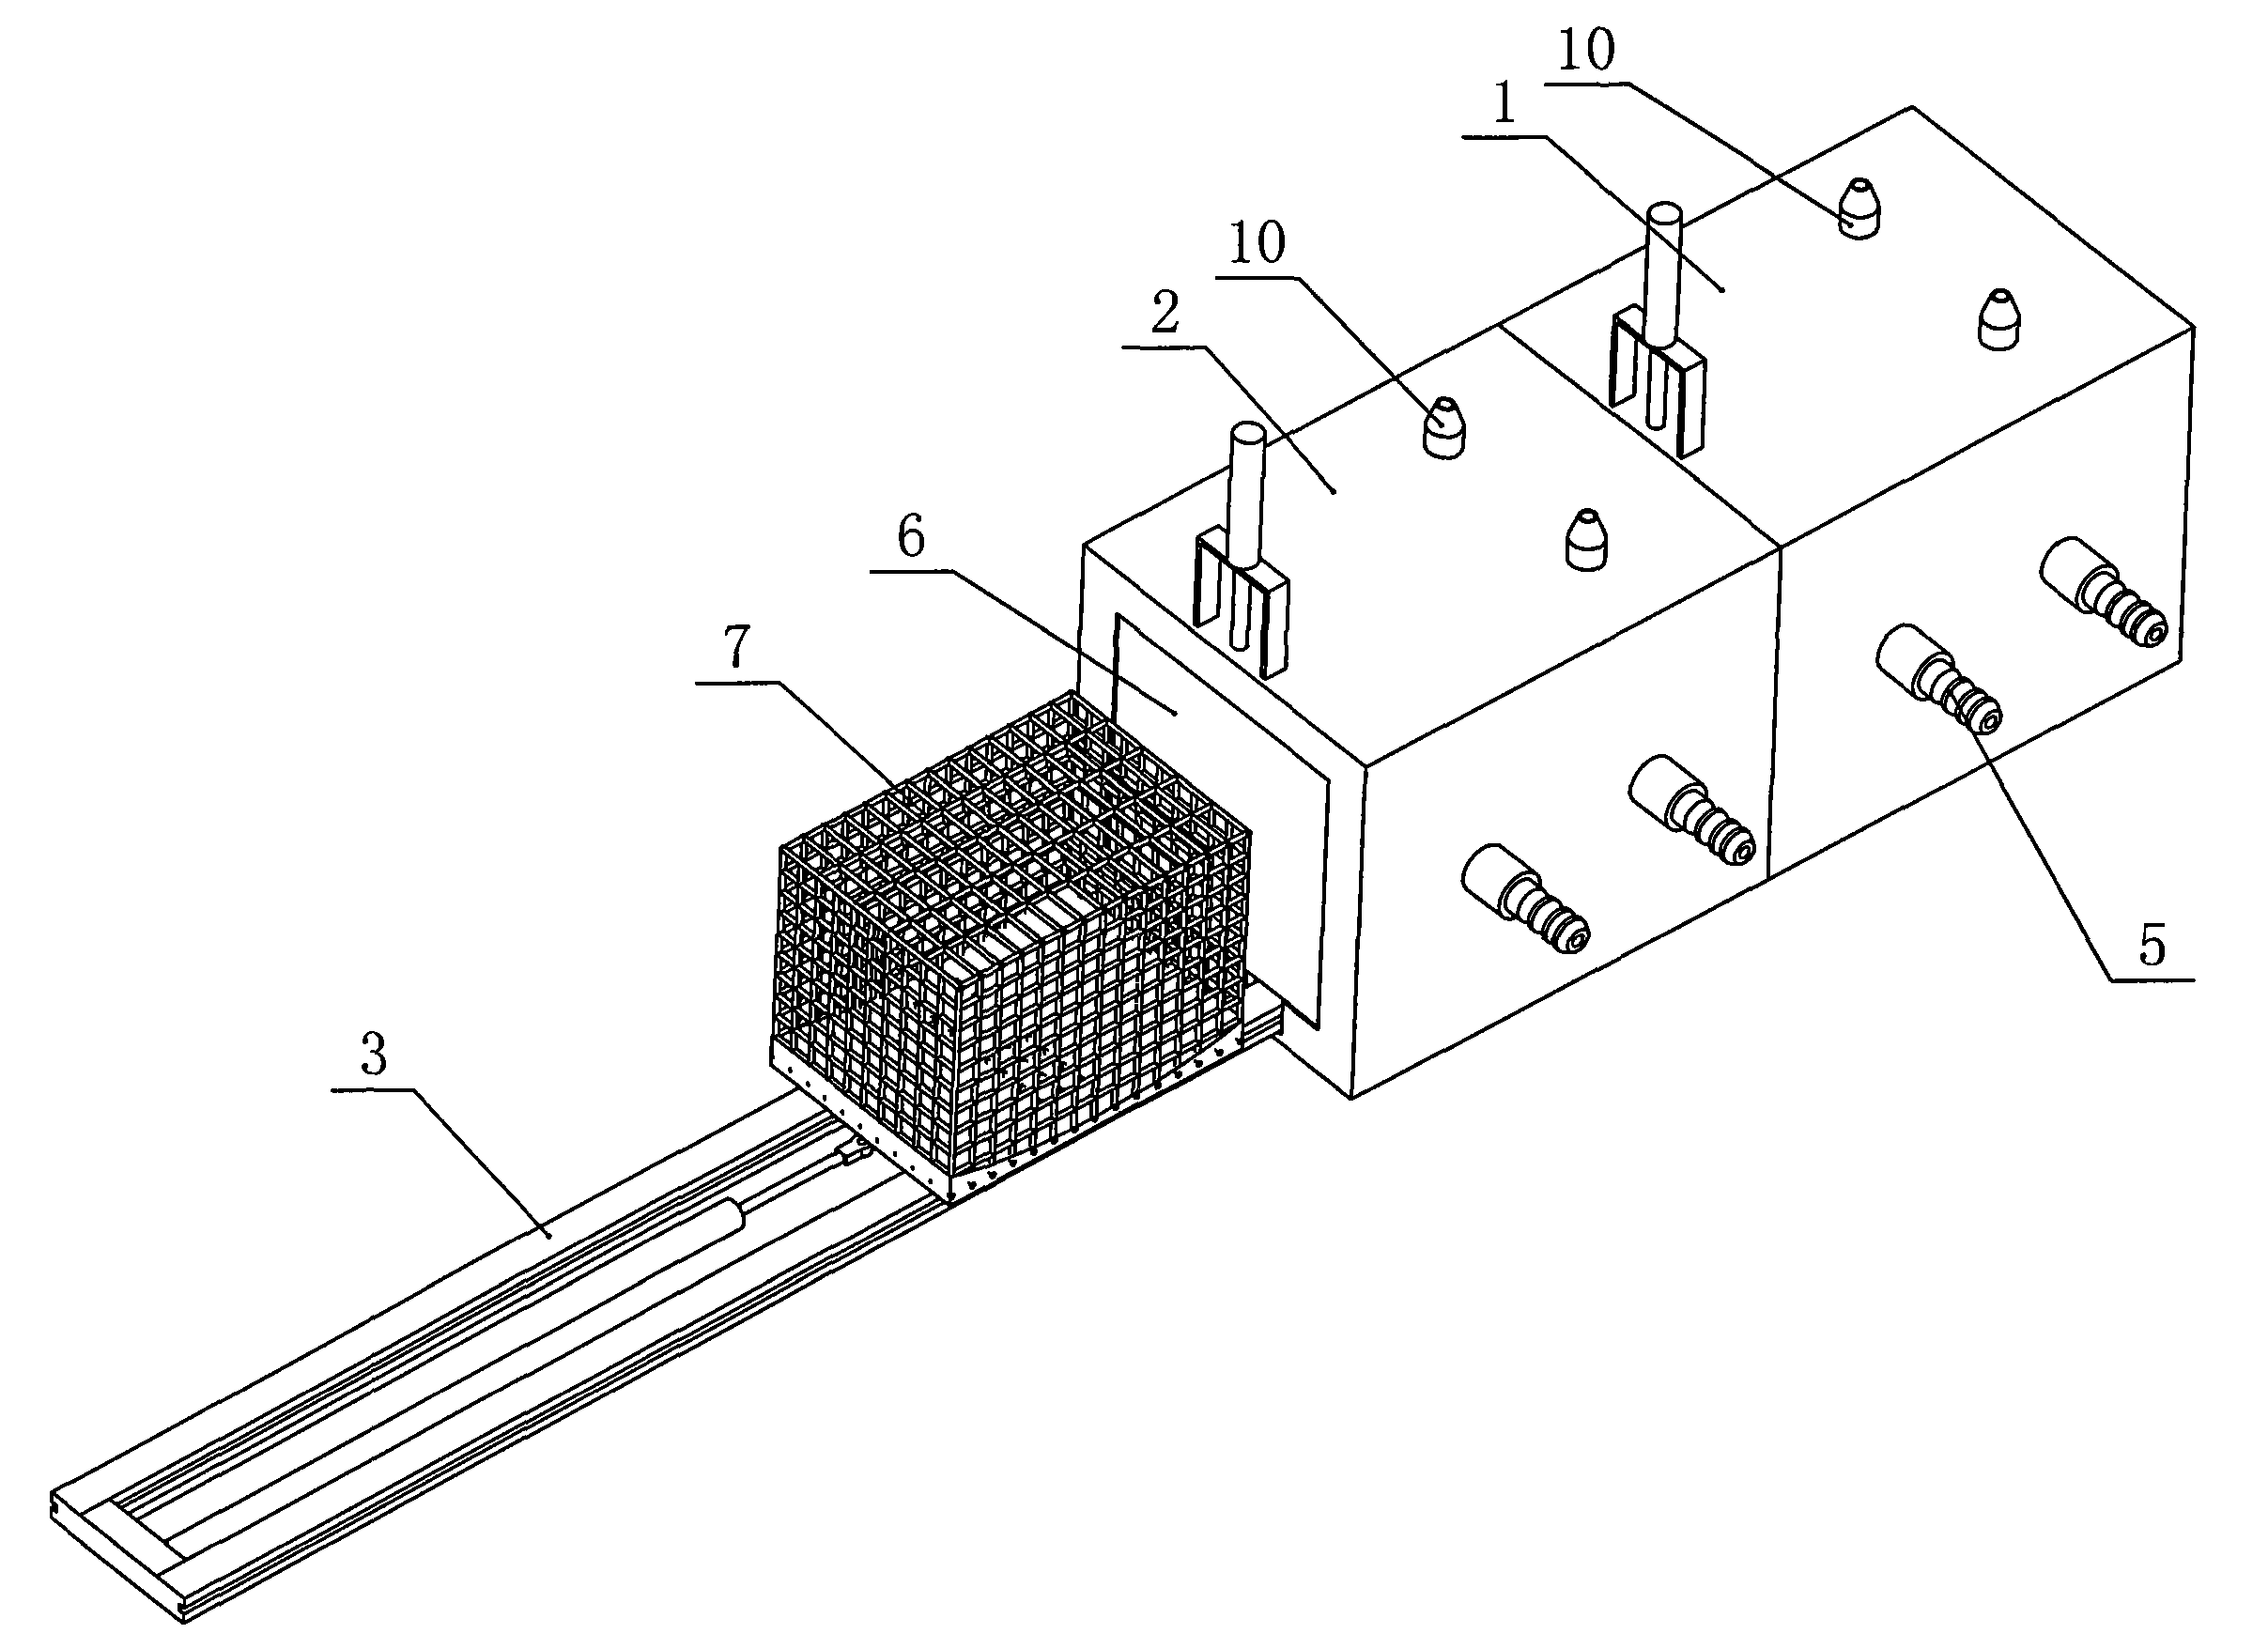 Intermittent hypoxia big and small mice feeding cabin of linear track type